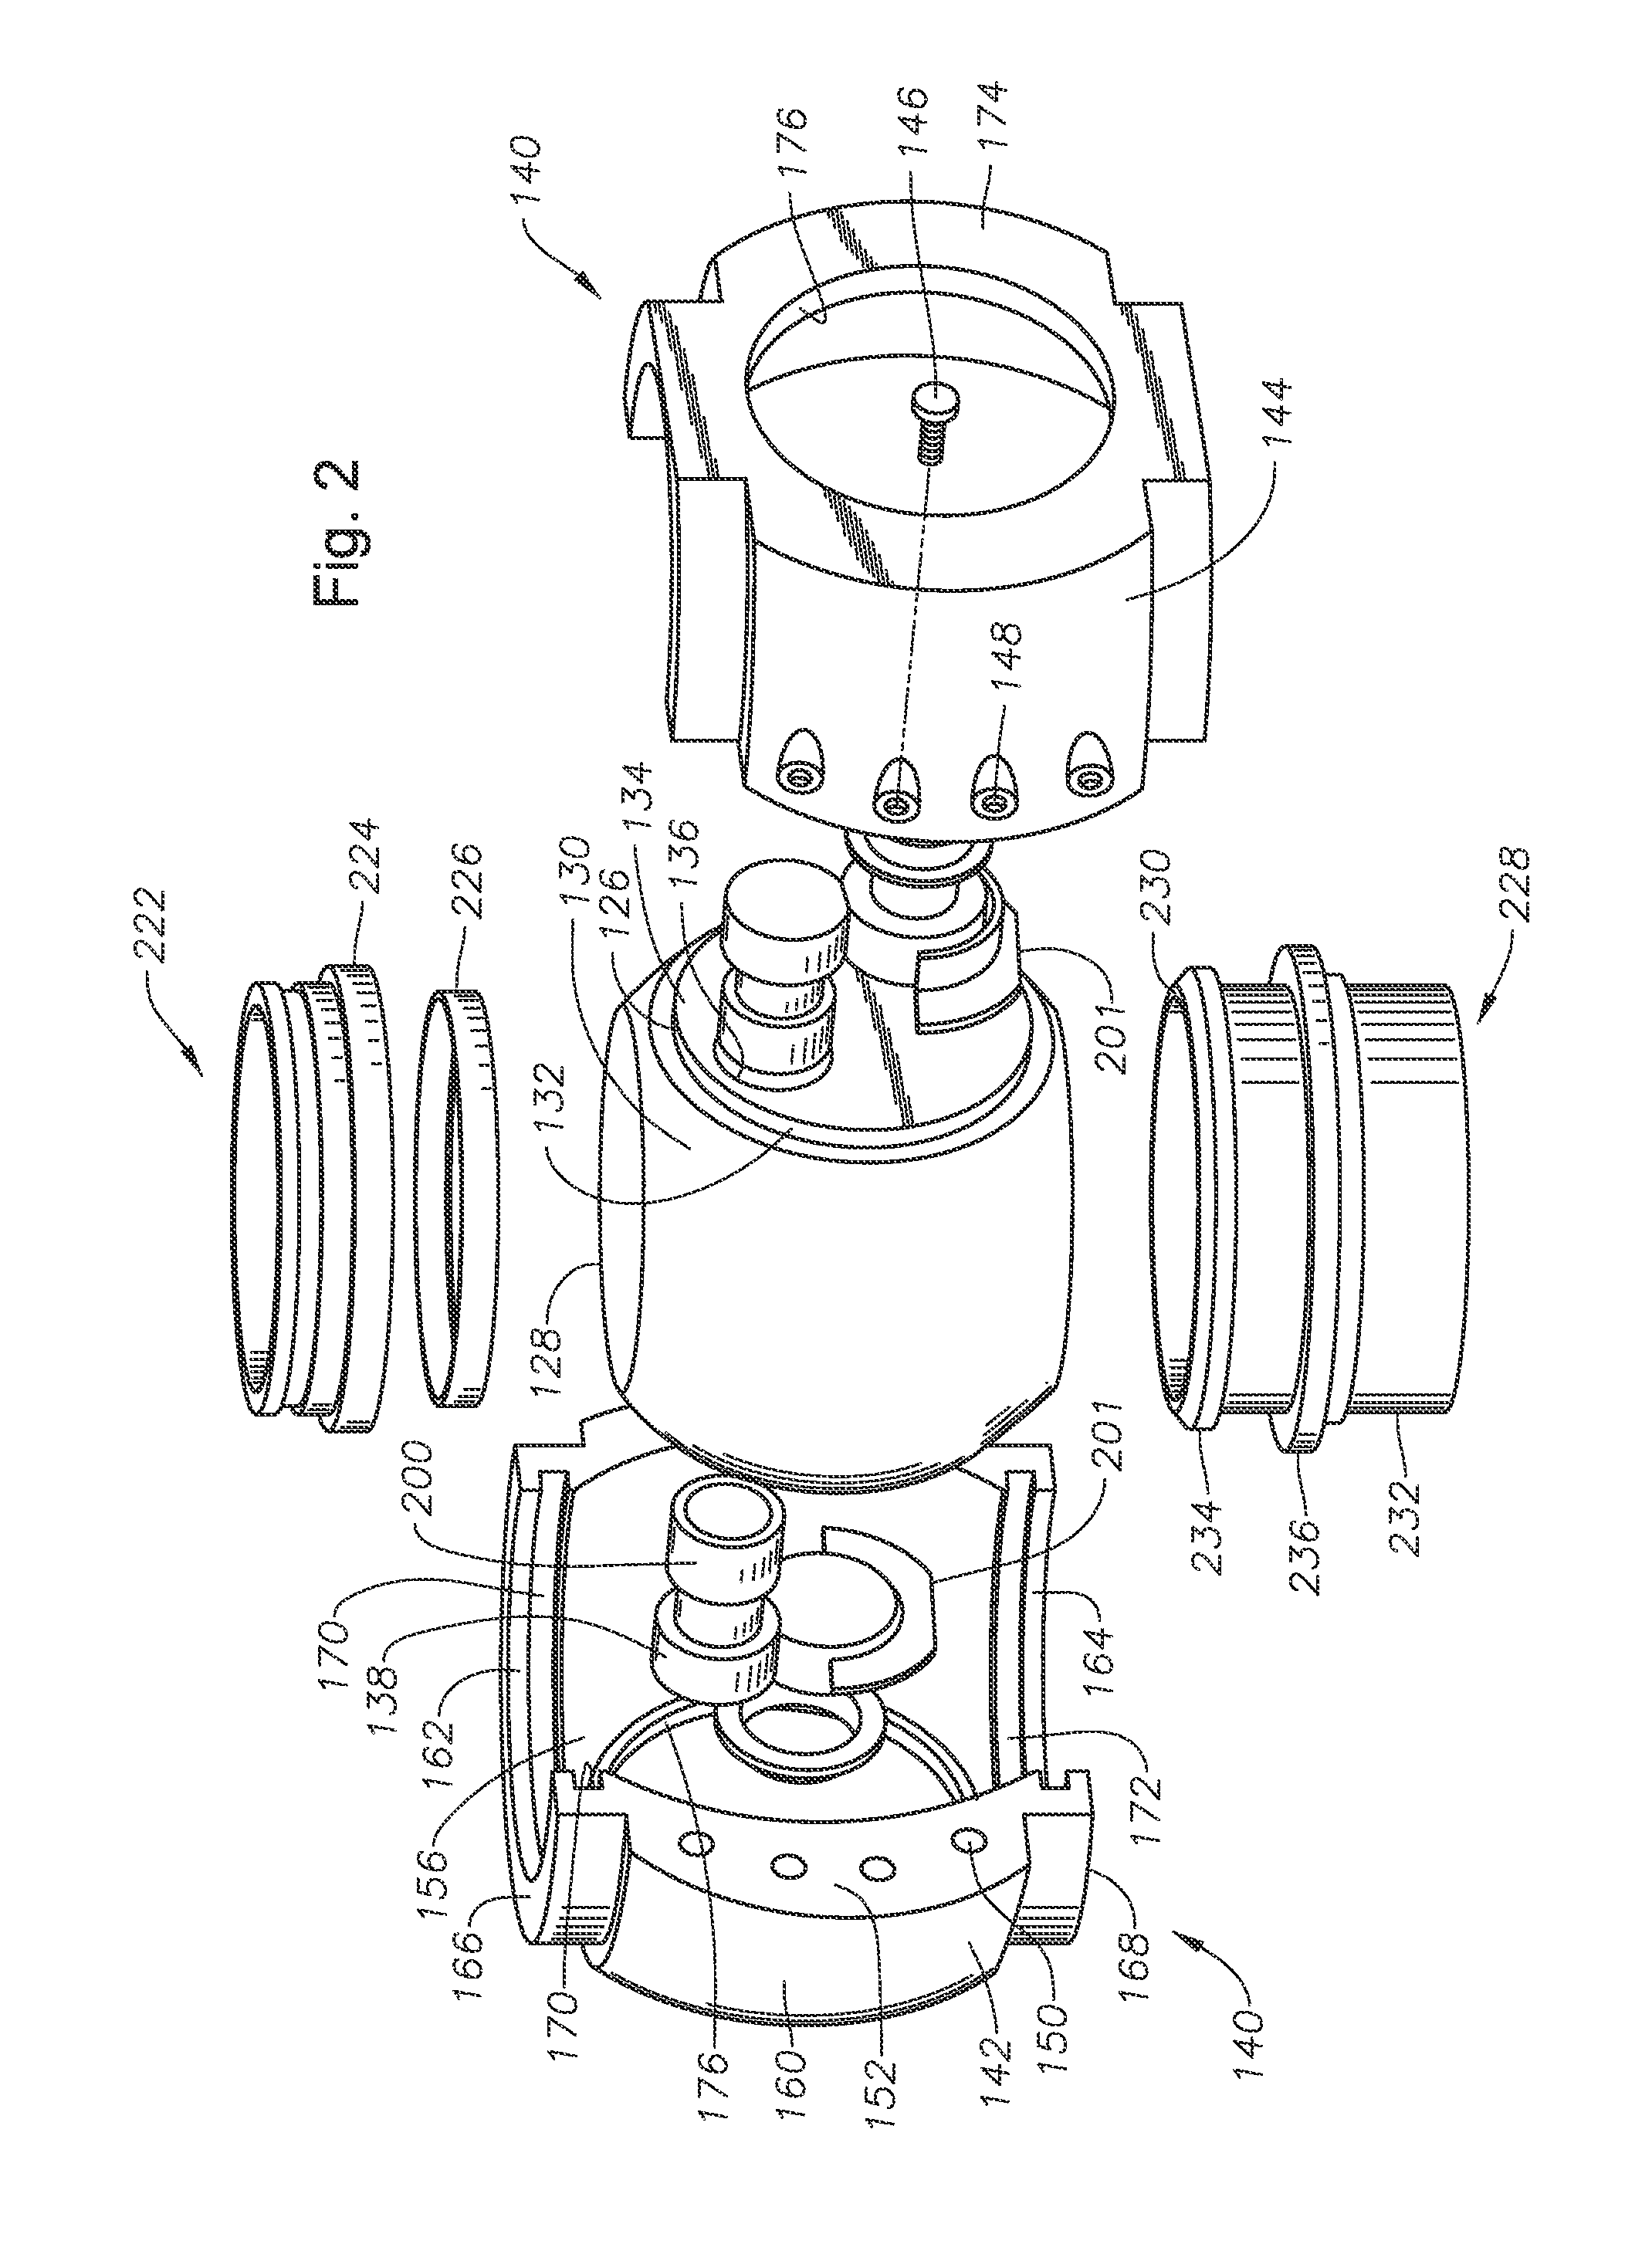 Ball valve enclosure and drive mechanism